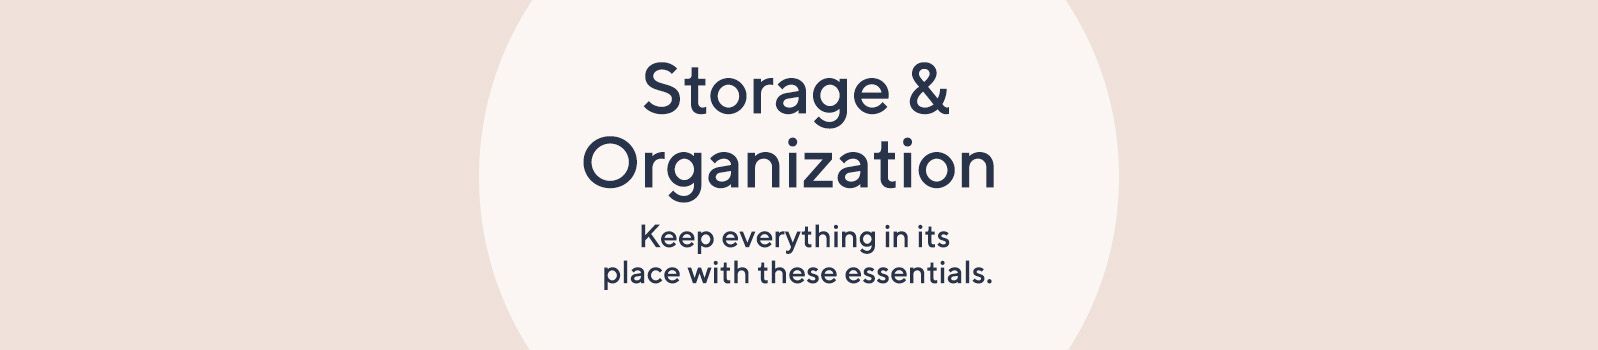 Storage & Organization - Keep everything in its place with these essentials.